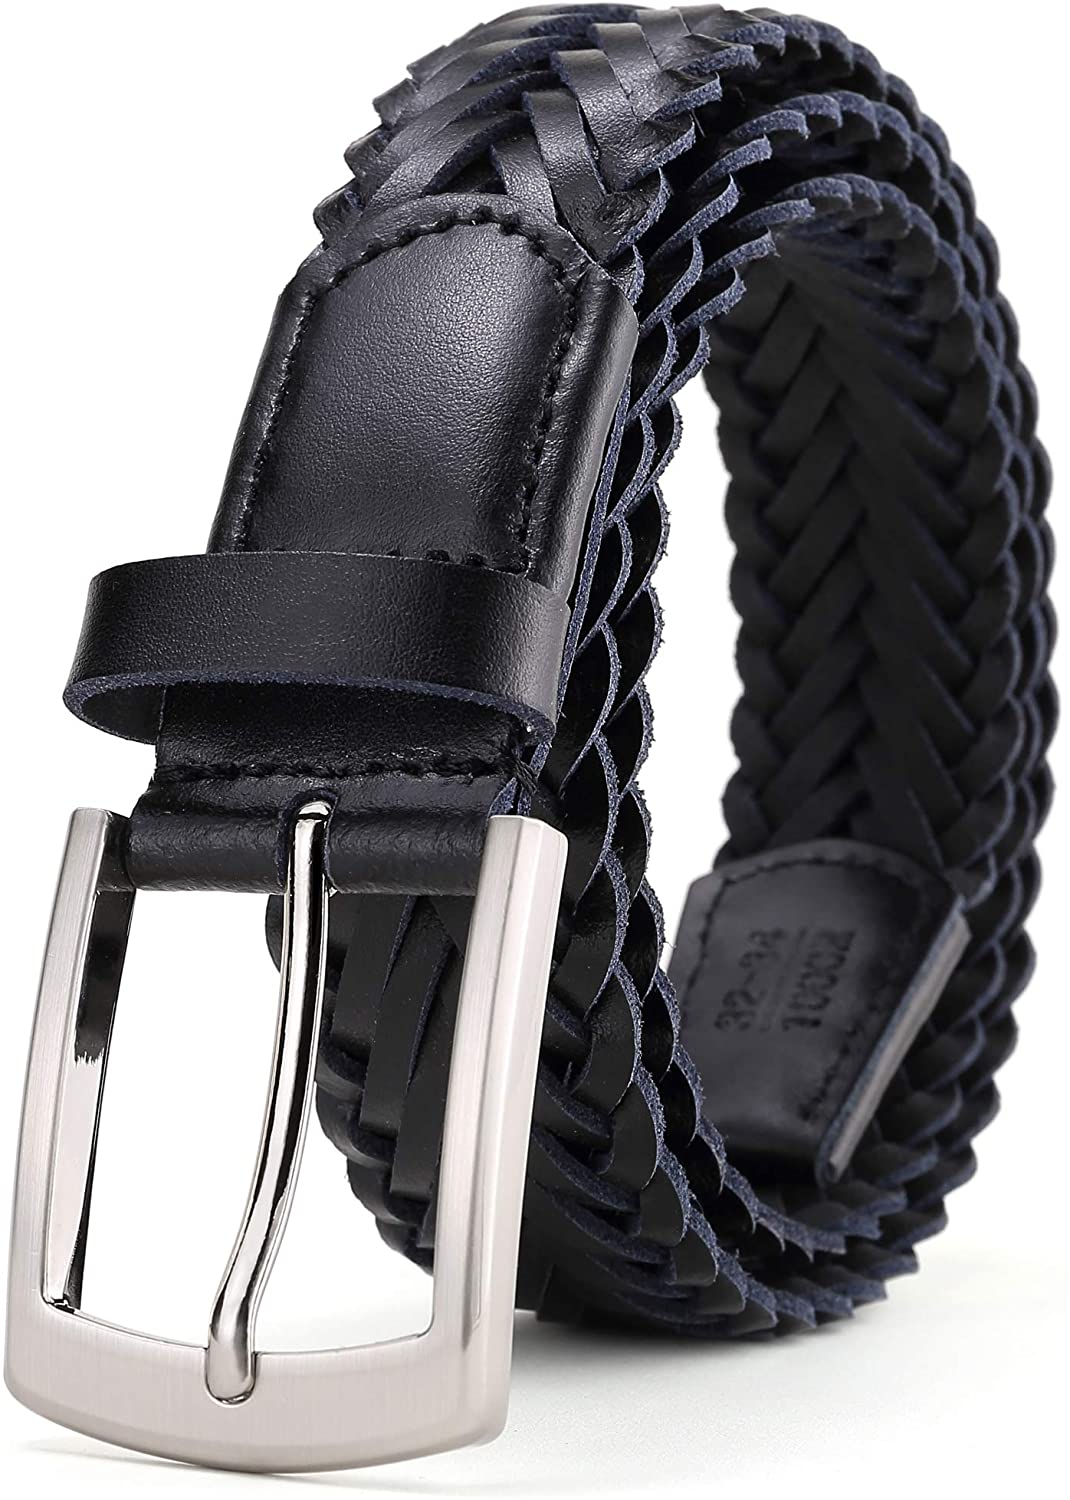 WHIPPY Braided Leather Belts for Men, Mens Woven Belt for Jeans Pants 